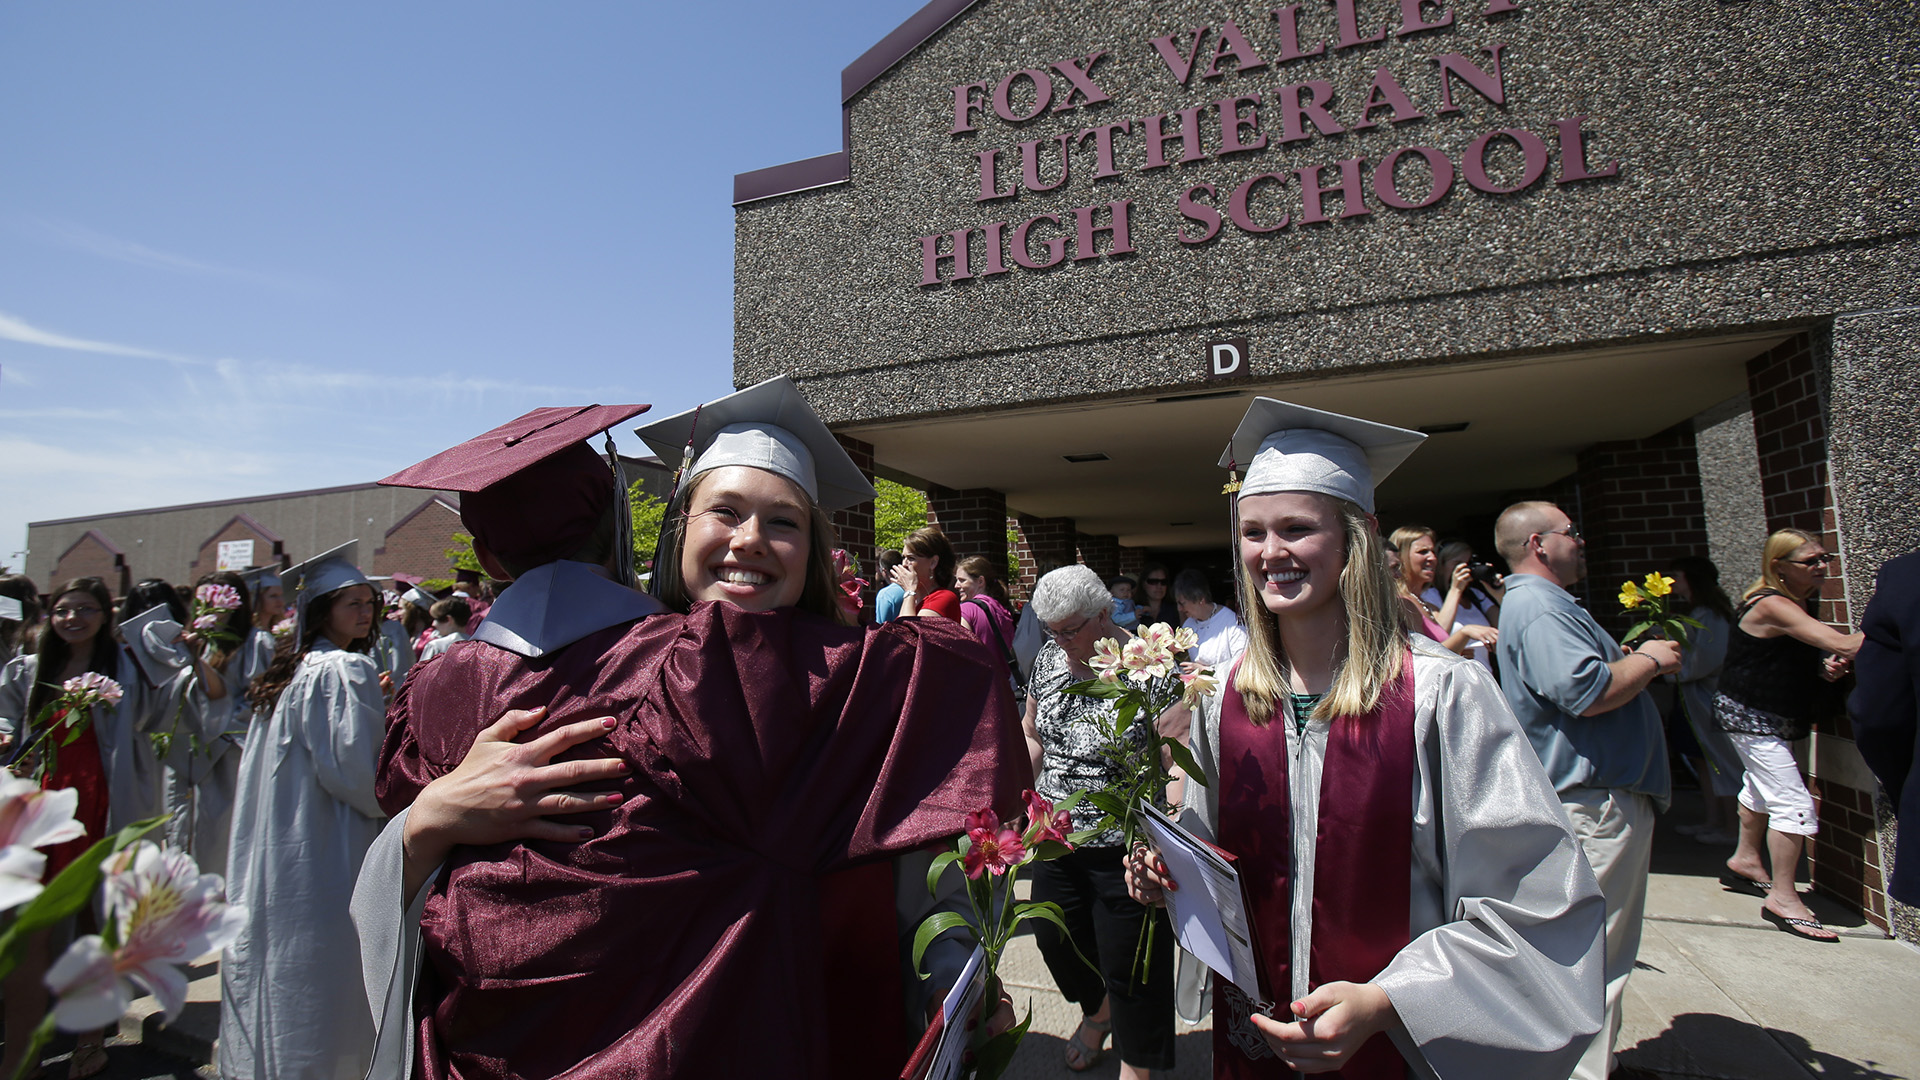 Two students wearing graduation robes and caps hug each other with other graduates and other family members standing on a sidewalk in front of a building with a pebble façade with a sign that reads "Fox Valley Lutheran High School."